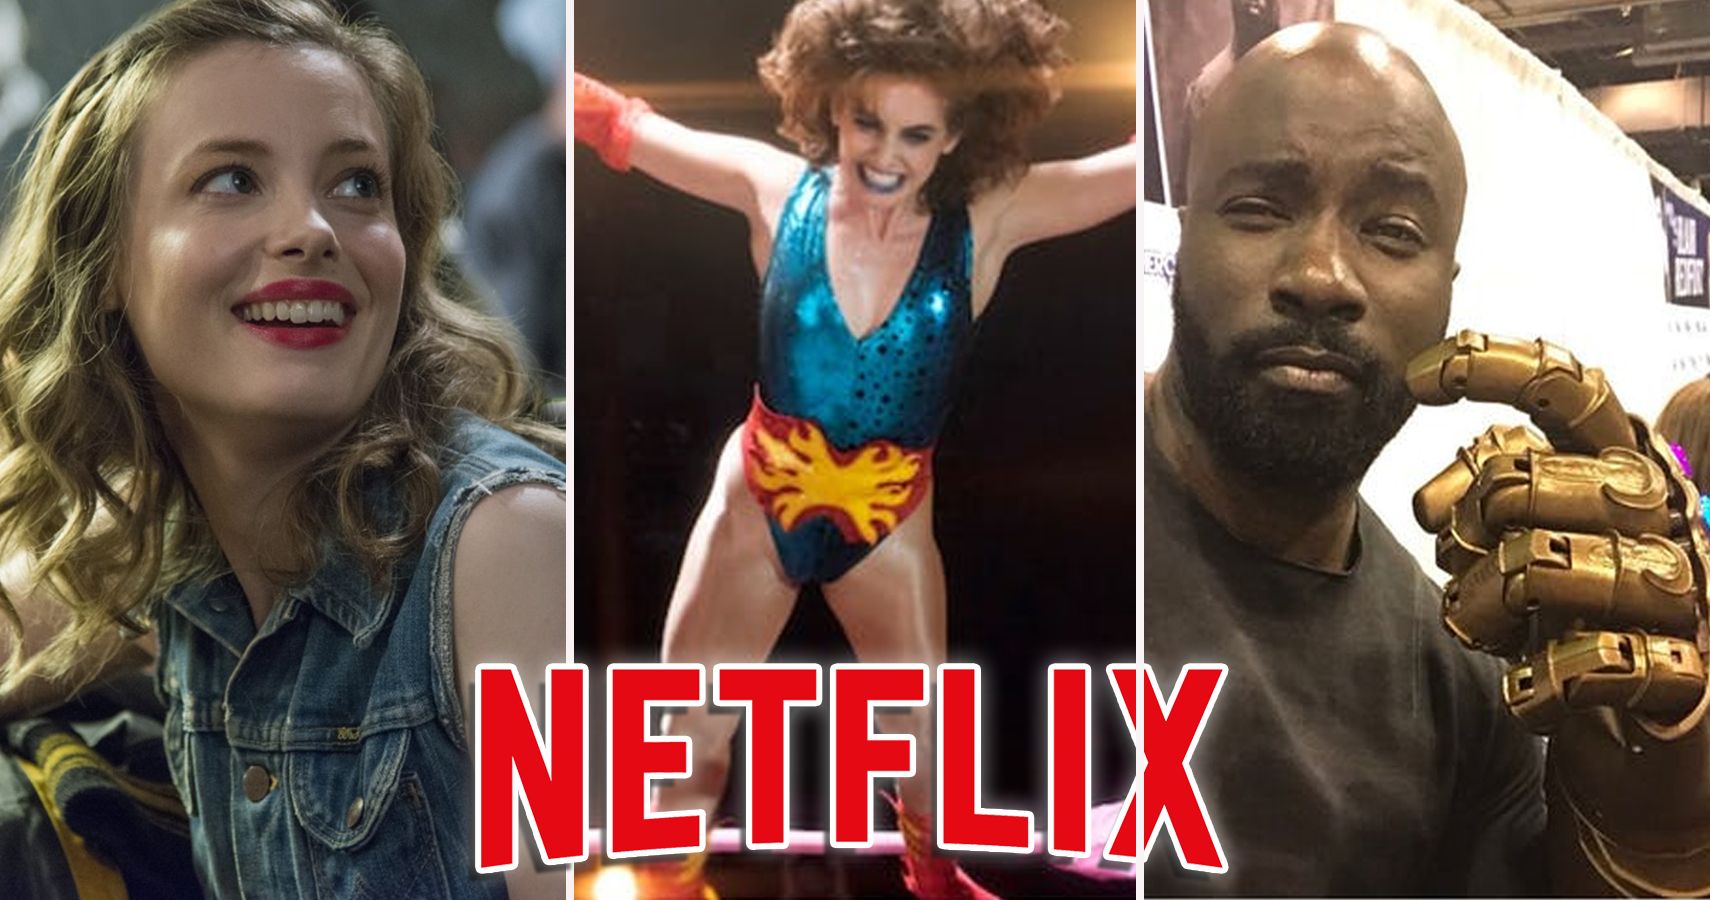 25 Netflix Originals Coming Summer 2018 That We Need To See